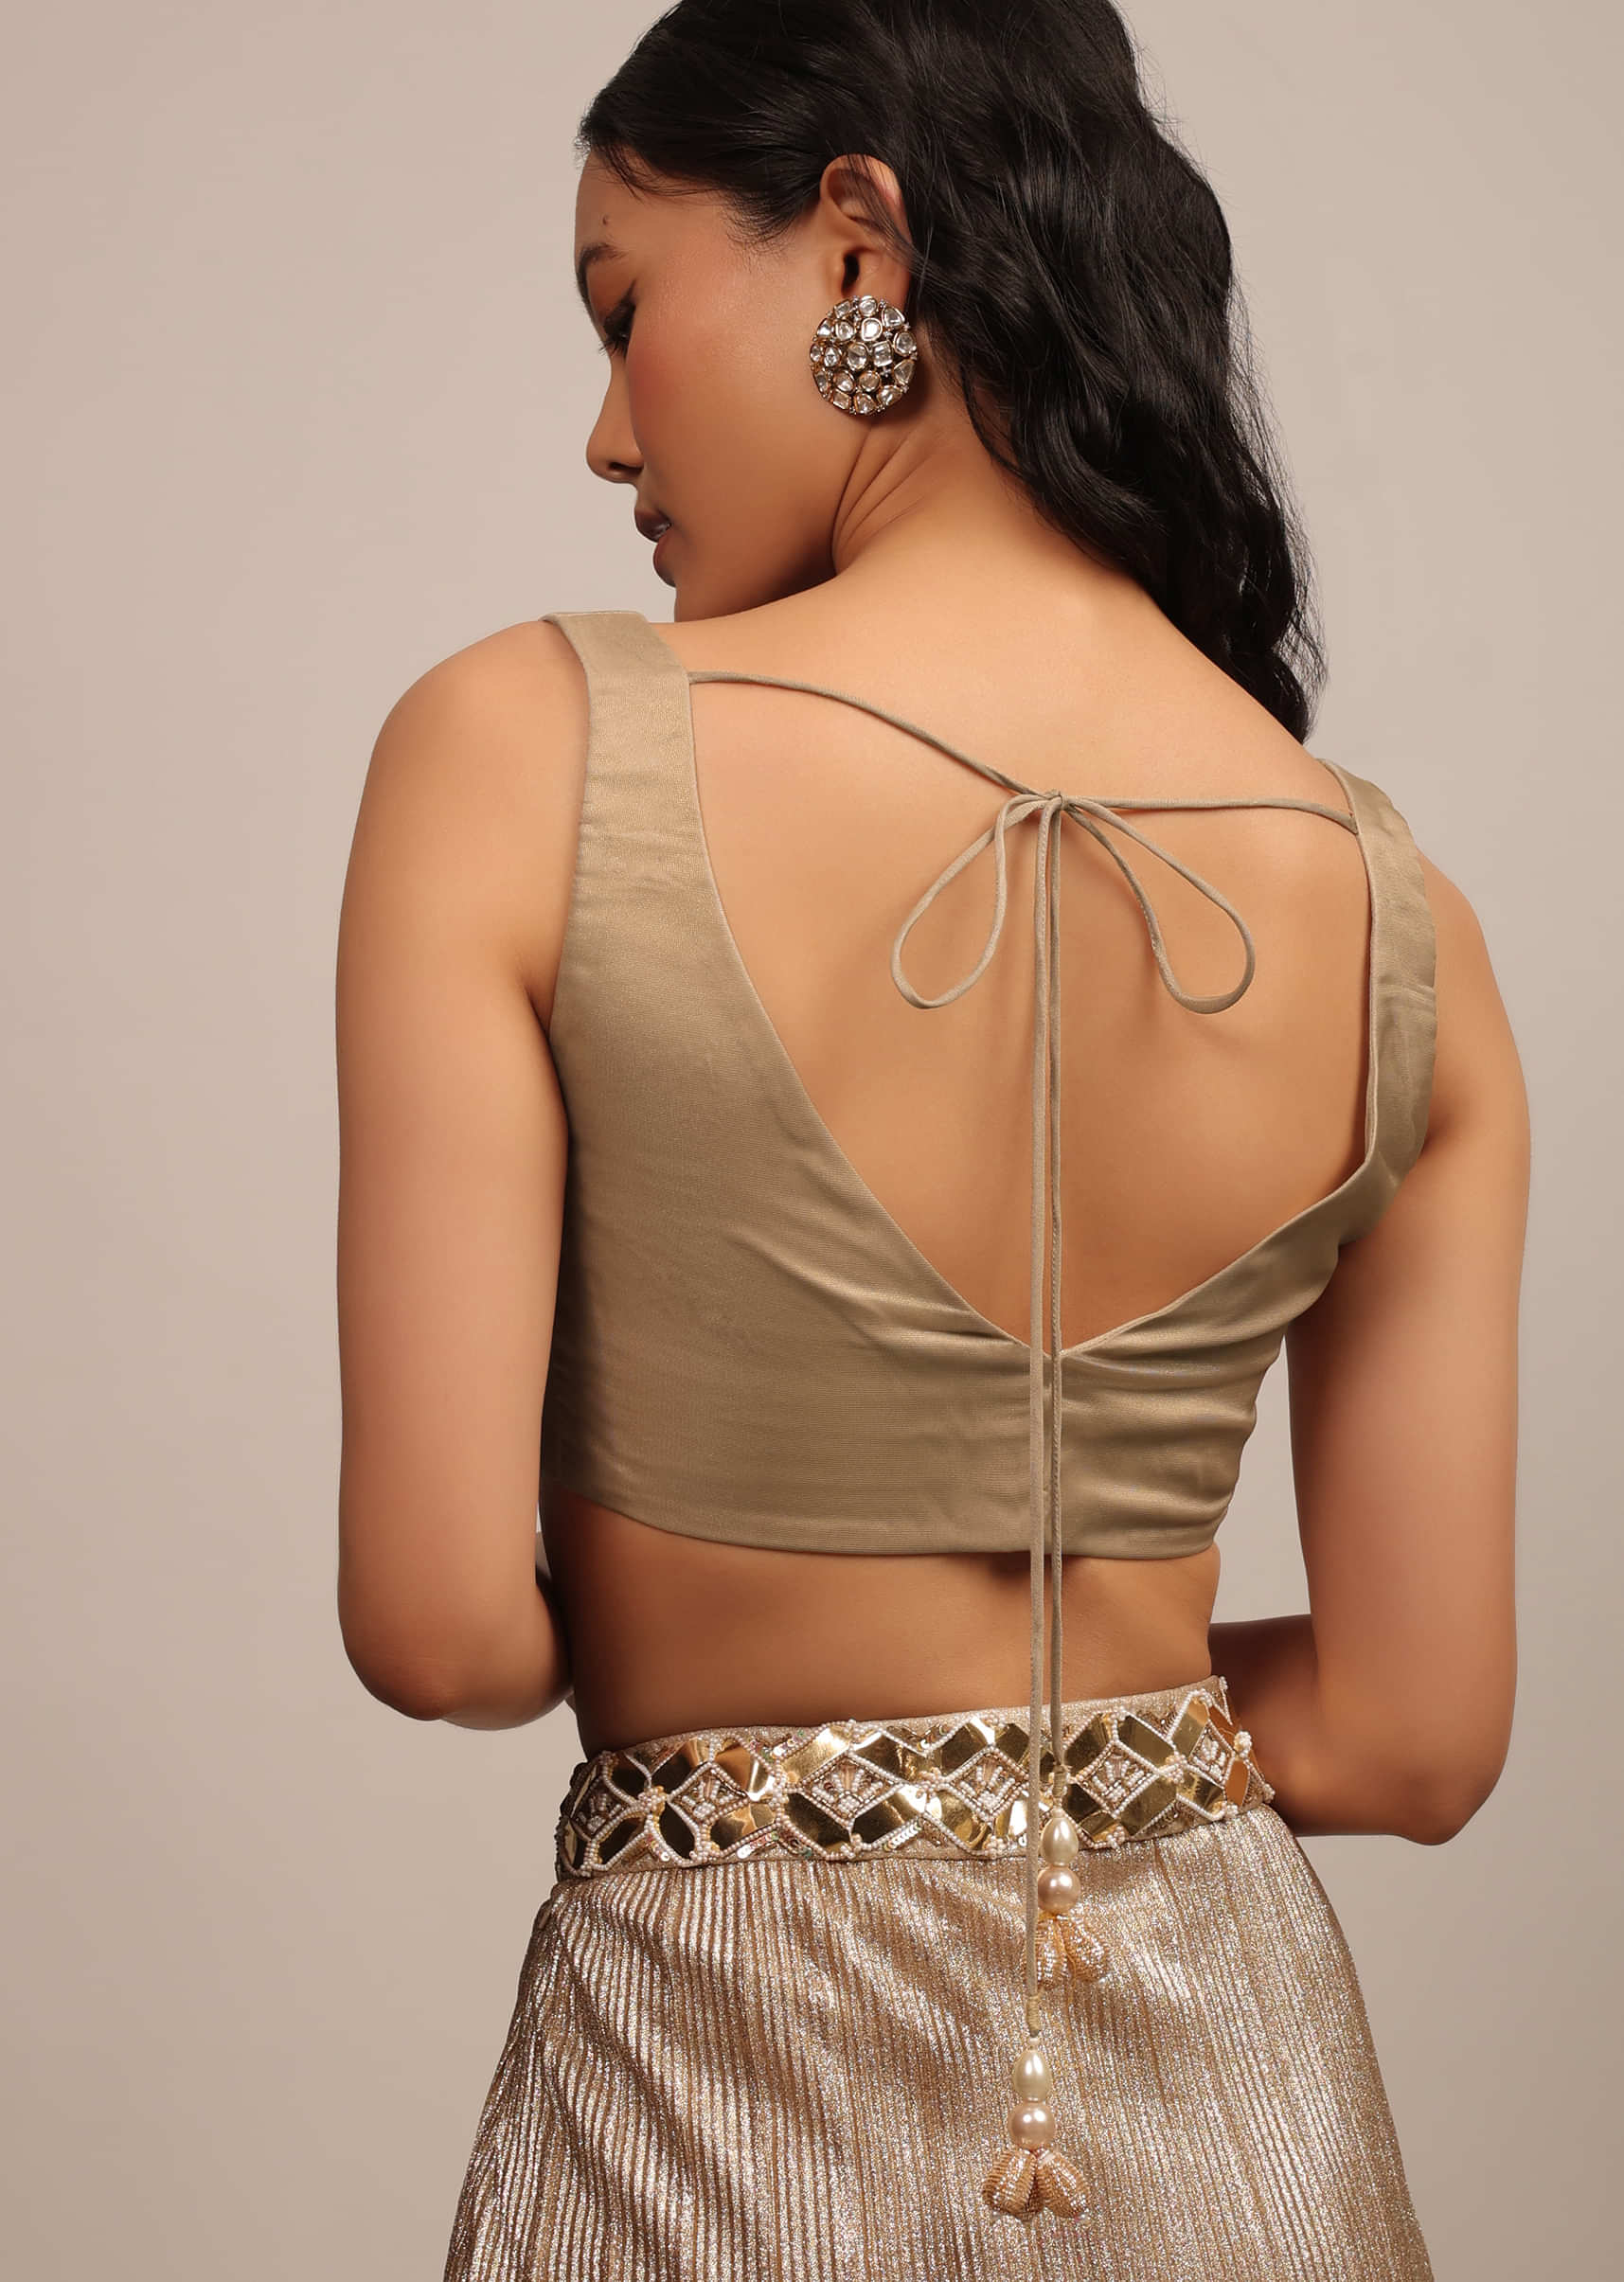 Dusty Gold Sleeveless Blouse In Jute Organza Fabric With A Sweetheart Neckline